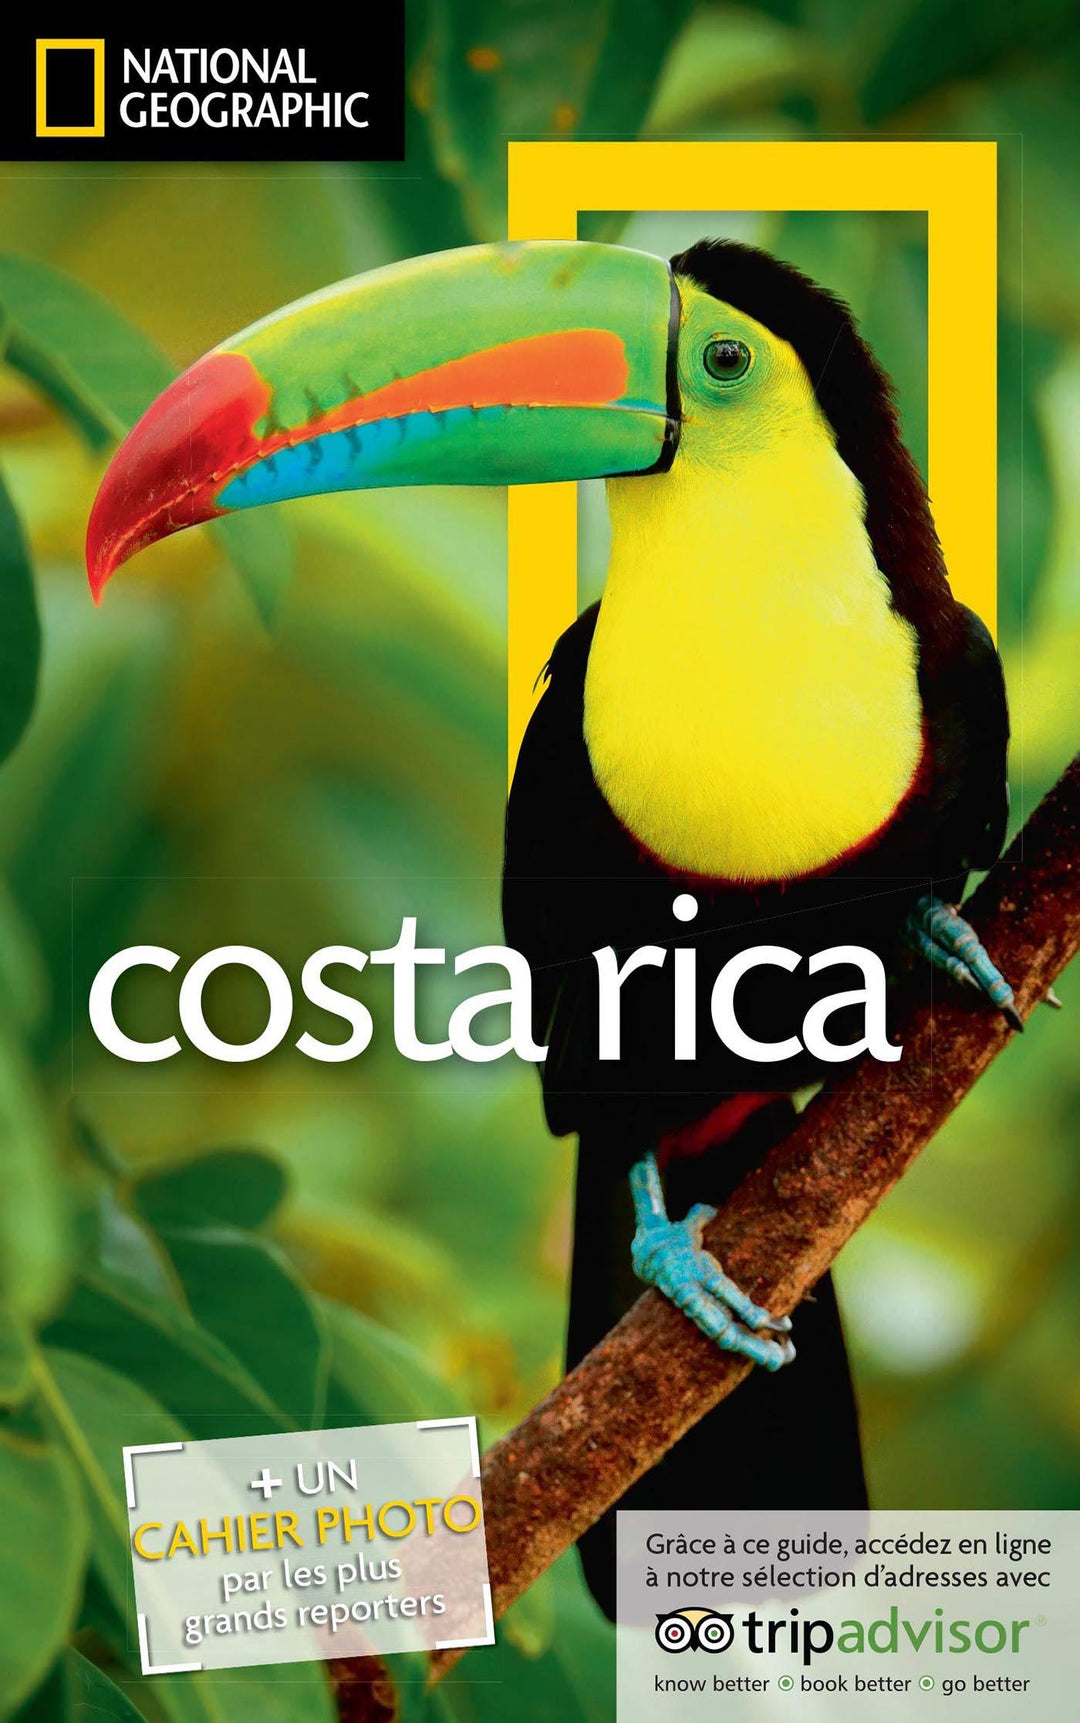 Guide de voyage - Costa Rica | National Geographic guide de voyage National Geographic 